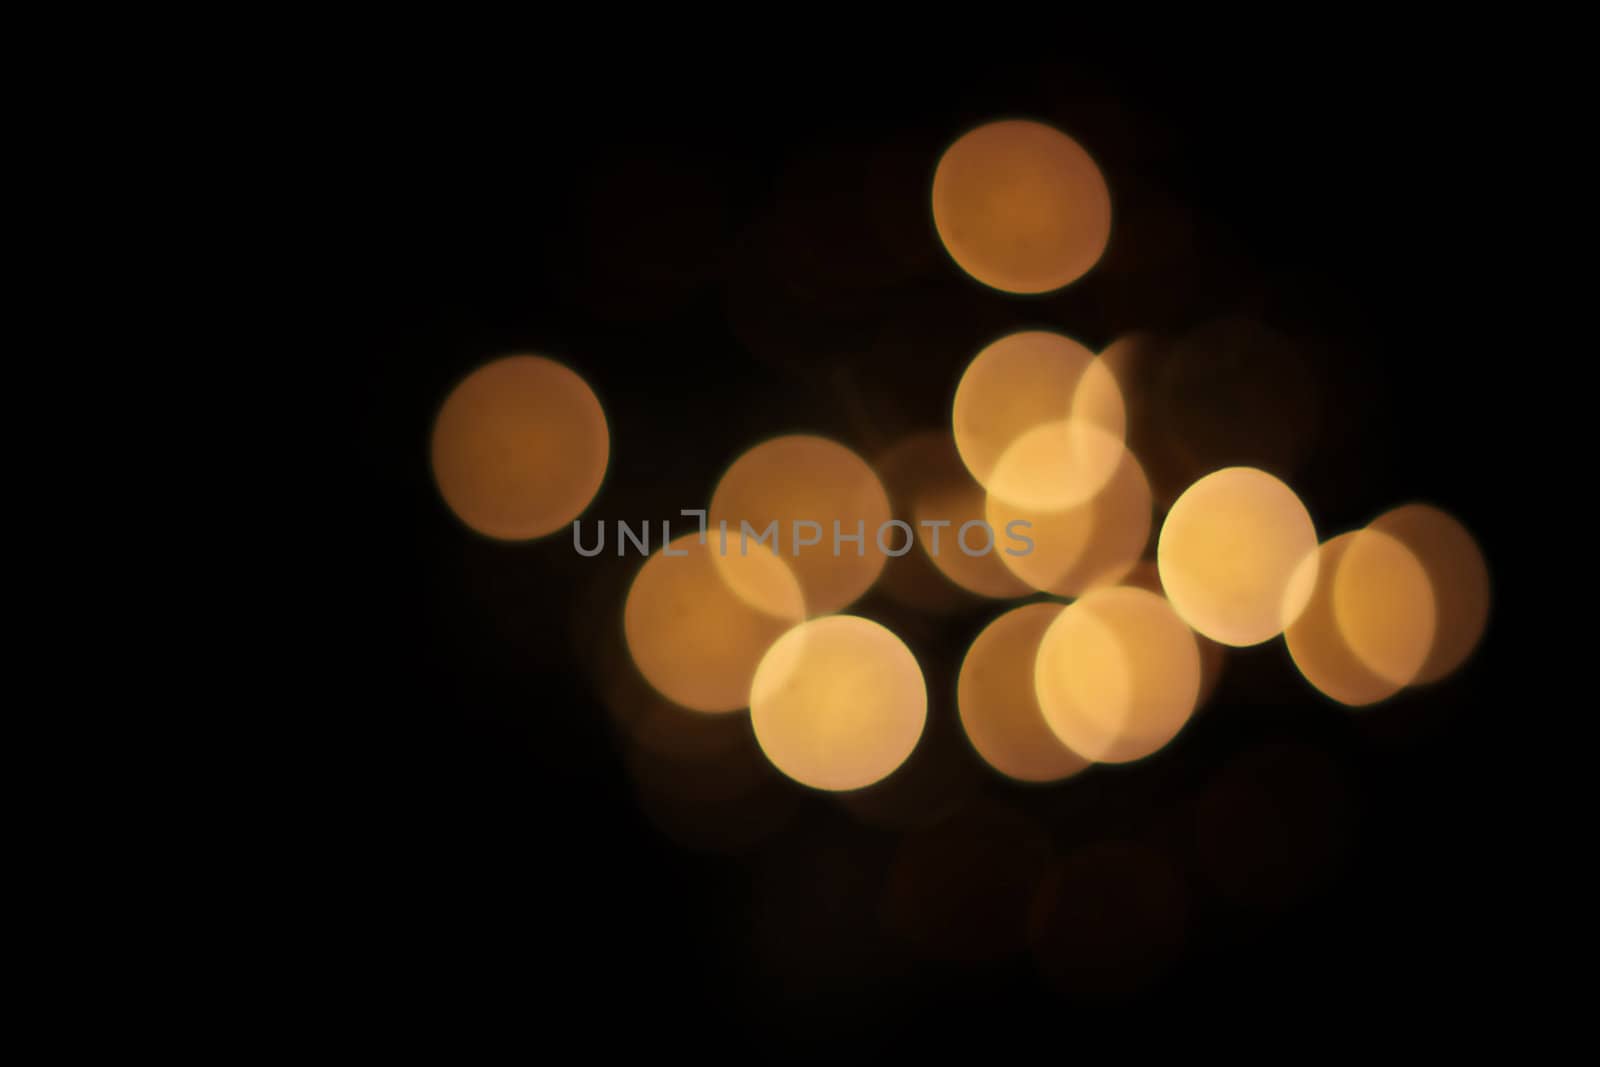  Bokeh - Lens Flares- Blurred Lights by jeremywhat